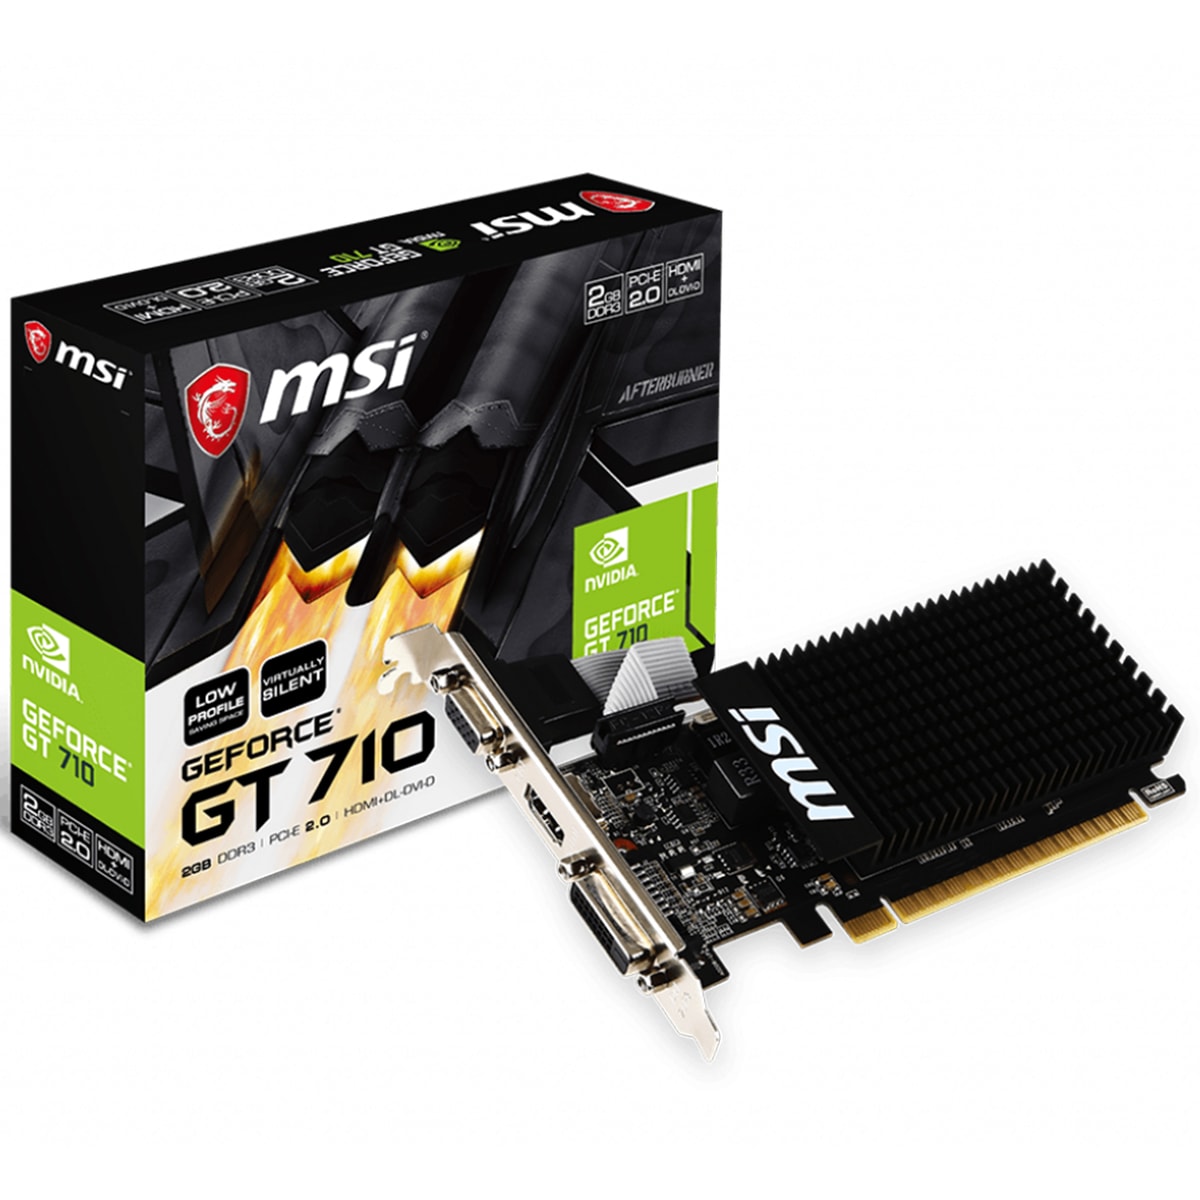 Buy MSI Geforce GT 710 2GB DDR3 LP At Cheapest Price On Pcshop